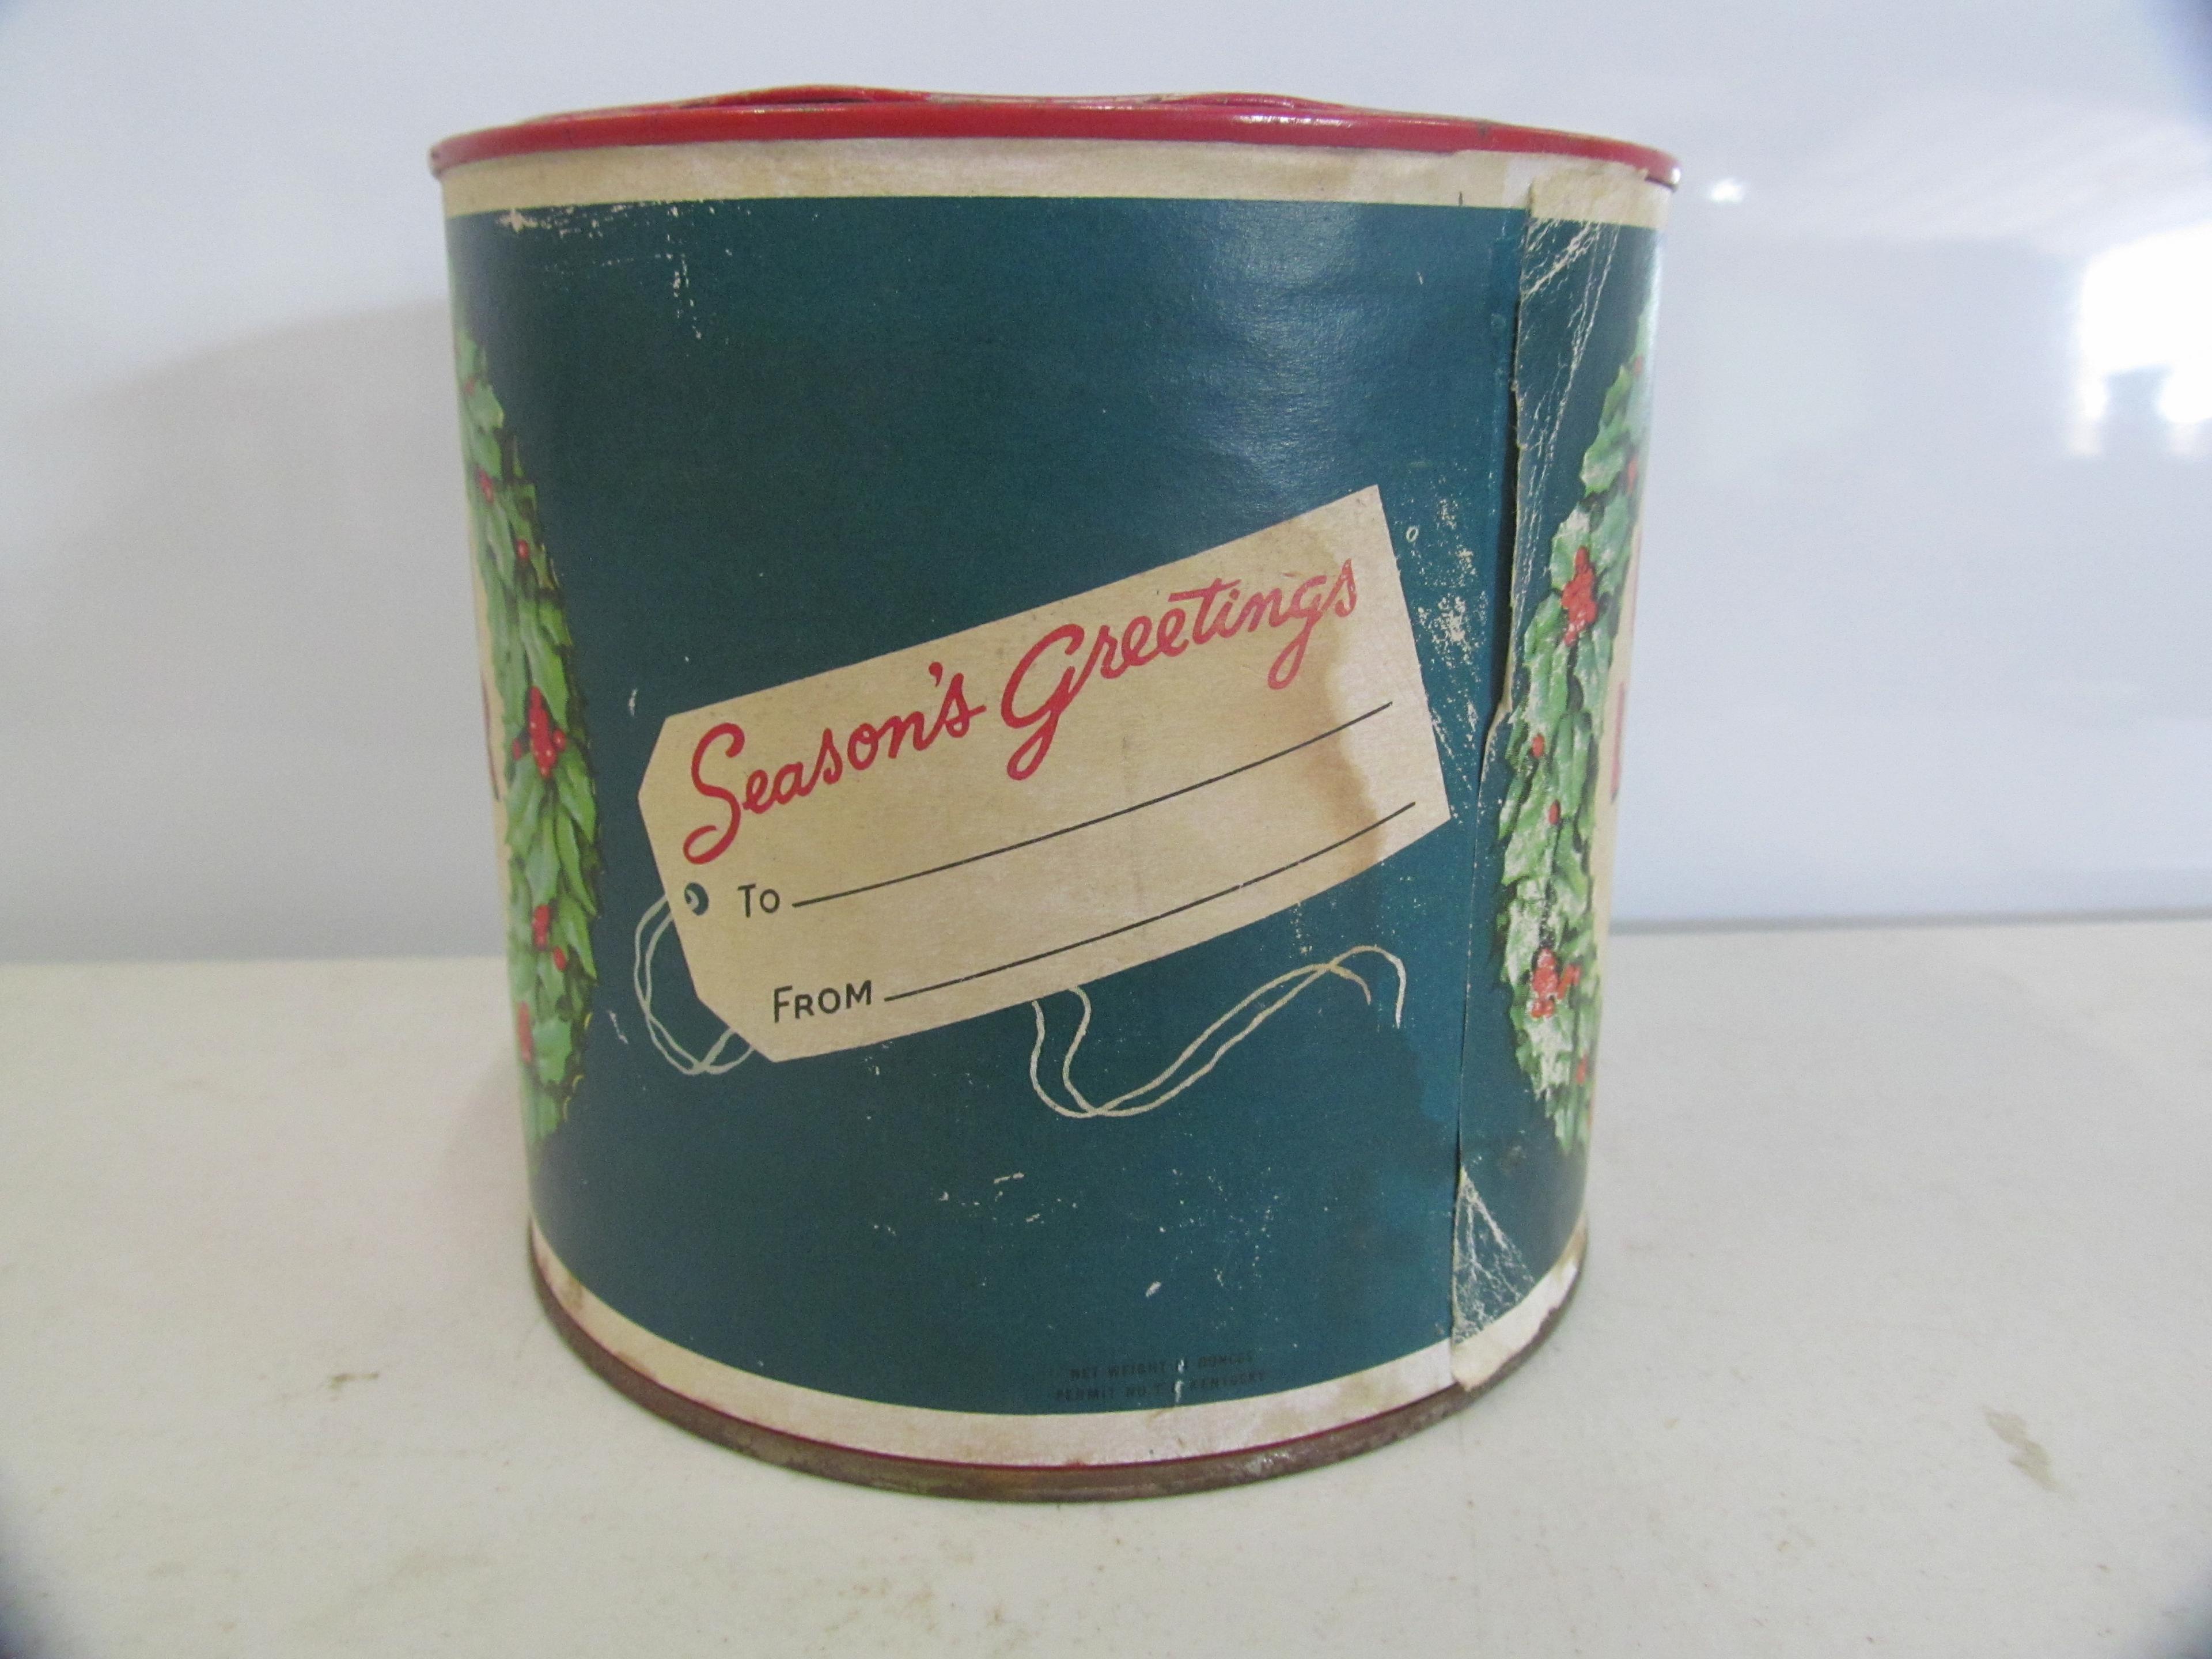 Union Leader; Seasons Greetings Christmas Holiday Round Canister